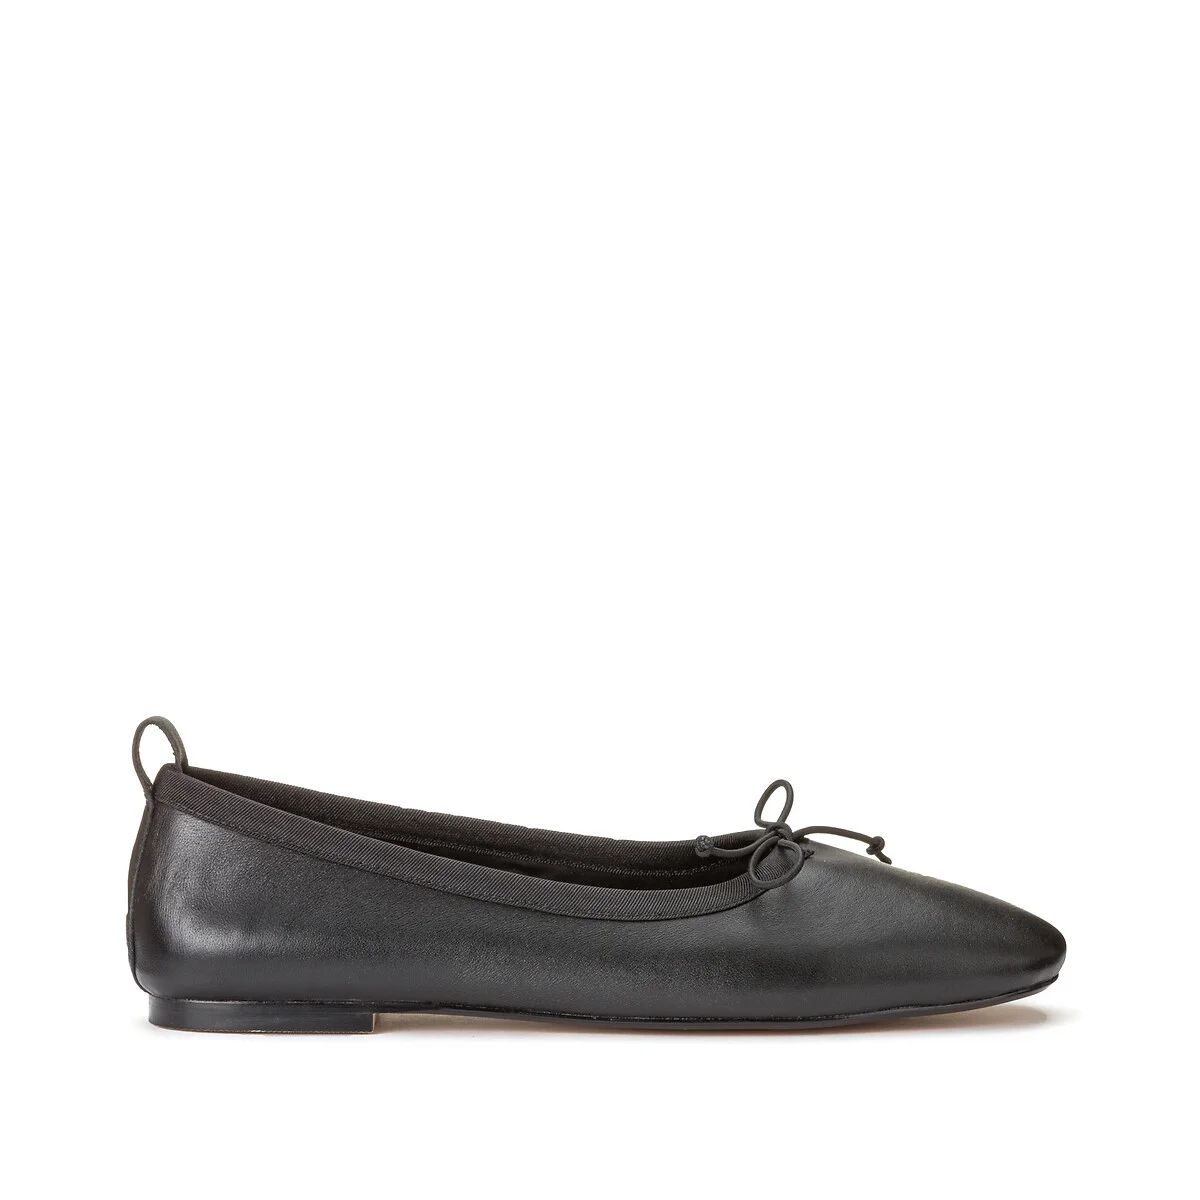 Leather Ballet Flats with Bow Detail | La Redoute (UK)